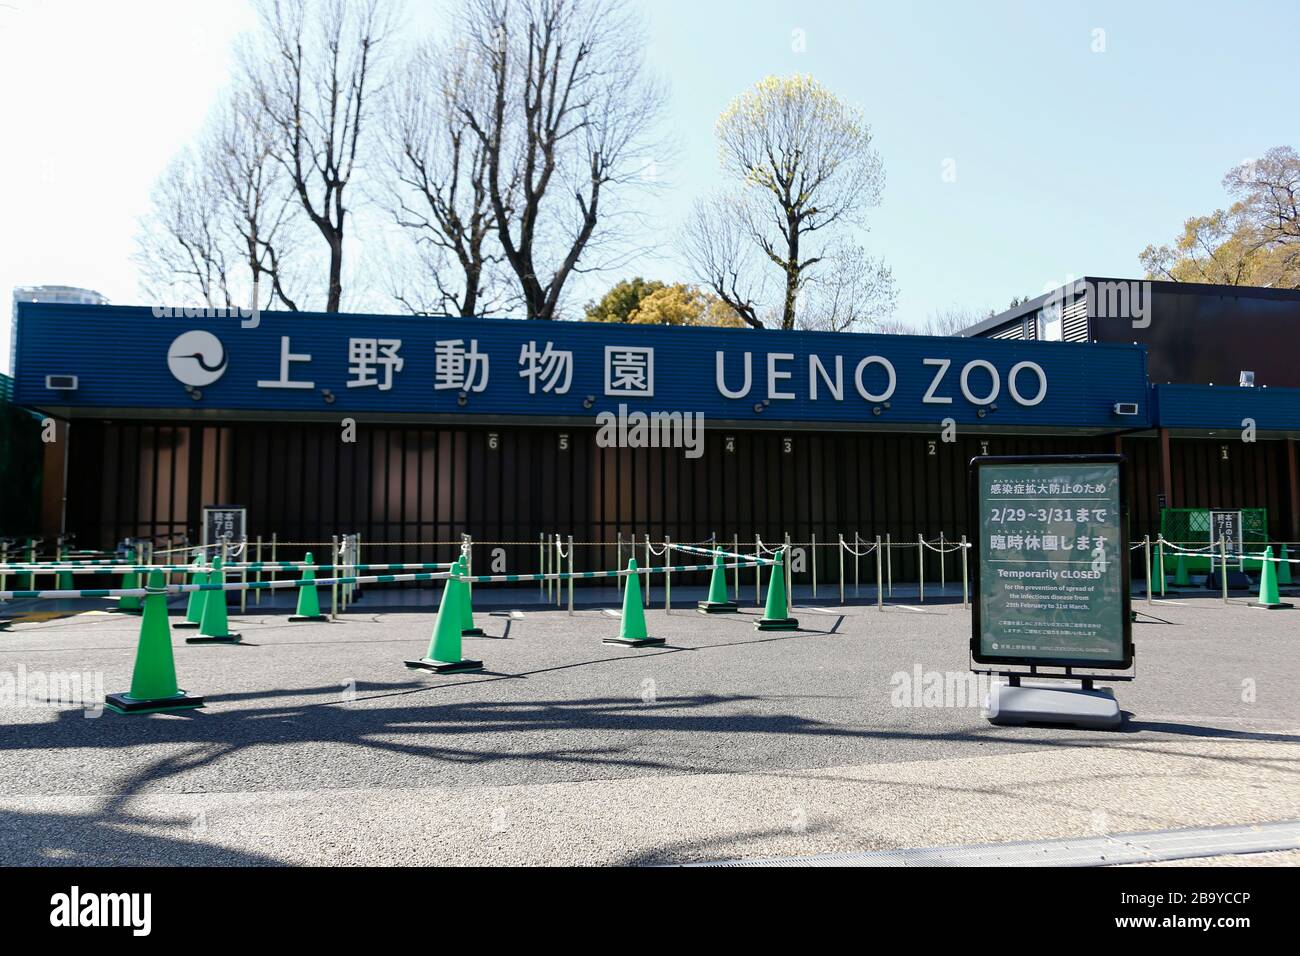 Tokyo, Japan. 25th Mar, 2020. Ueno Zoological Gardens displays and announcement which says the zoo will close until March 31 to prevent the spread of the COVID-19. Tokyo Governor Yuriko Koike asked residents, on Wednesday, to refrain from all non-essential outings this weekend, amid a rise of 41 new cases of coronavirus infections reported in Tokyo on Wednesday alone. During a news conference, Koike warned to lock down the city if the coronavirus infection cases continue rising. Credit: Rodrigo Reyes Marin/ZUMA Wire/Alamy Live News Stock Photo